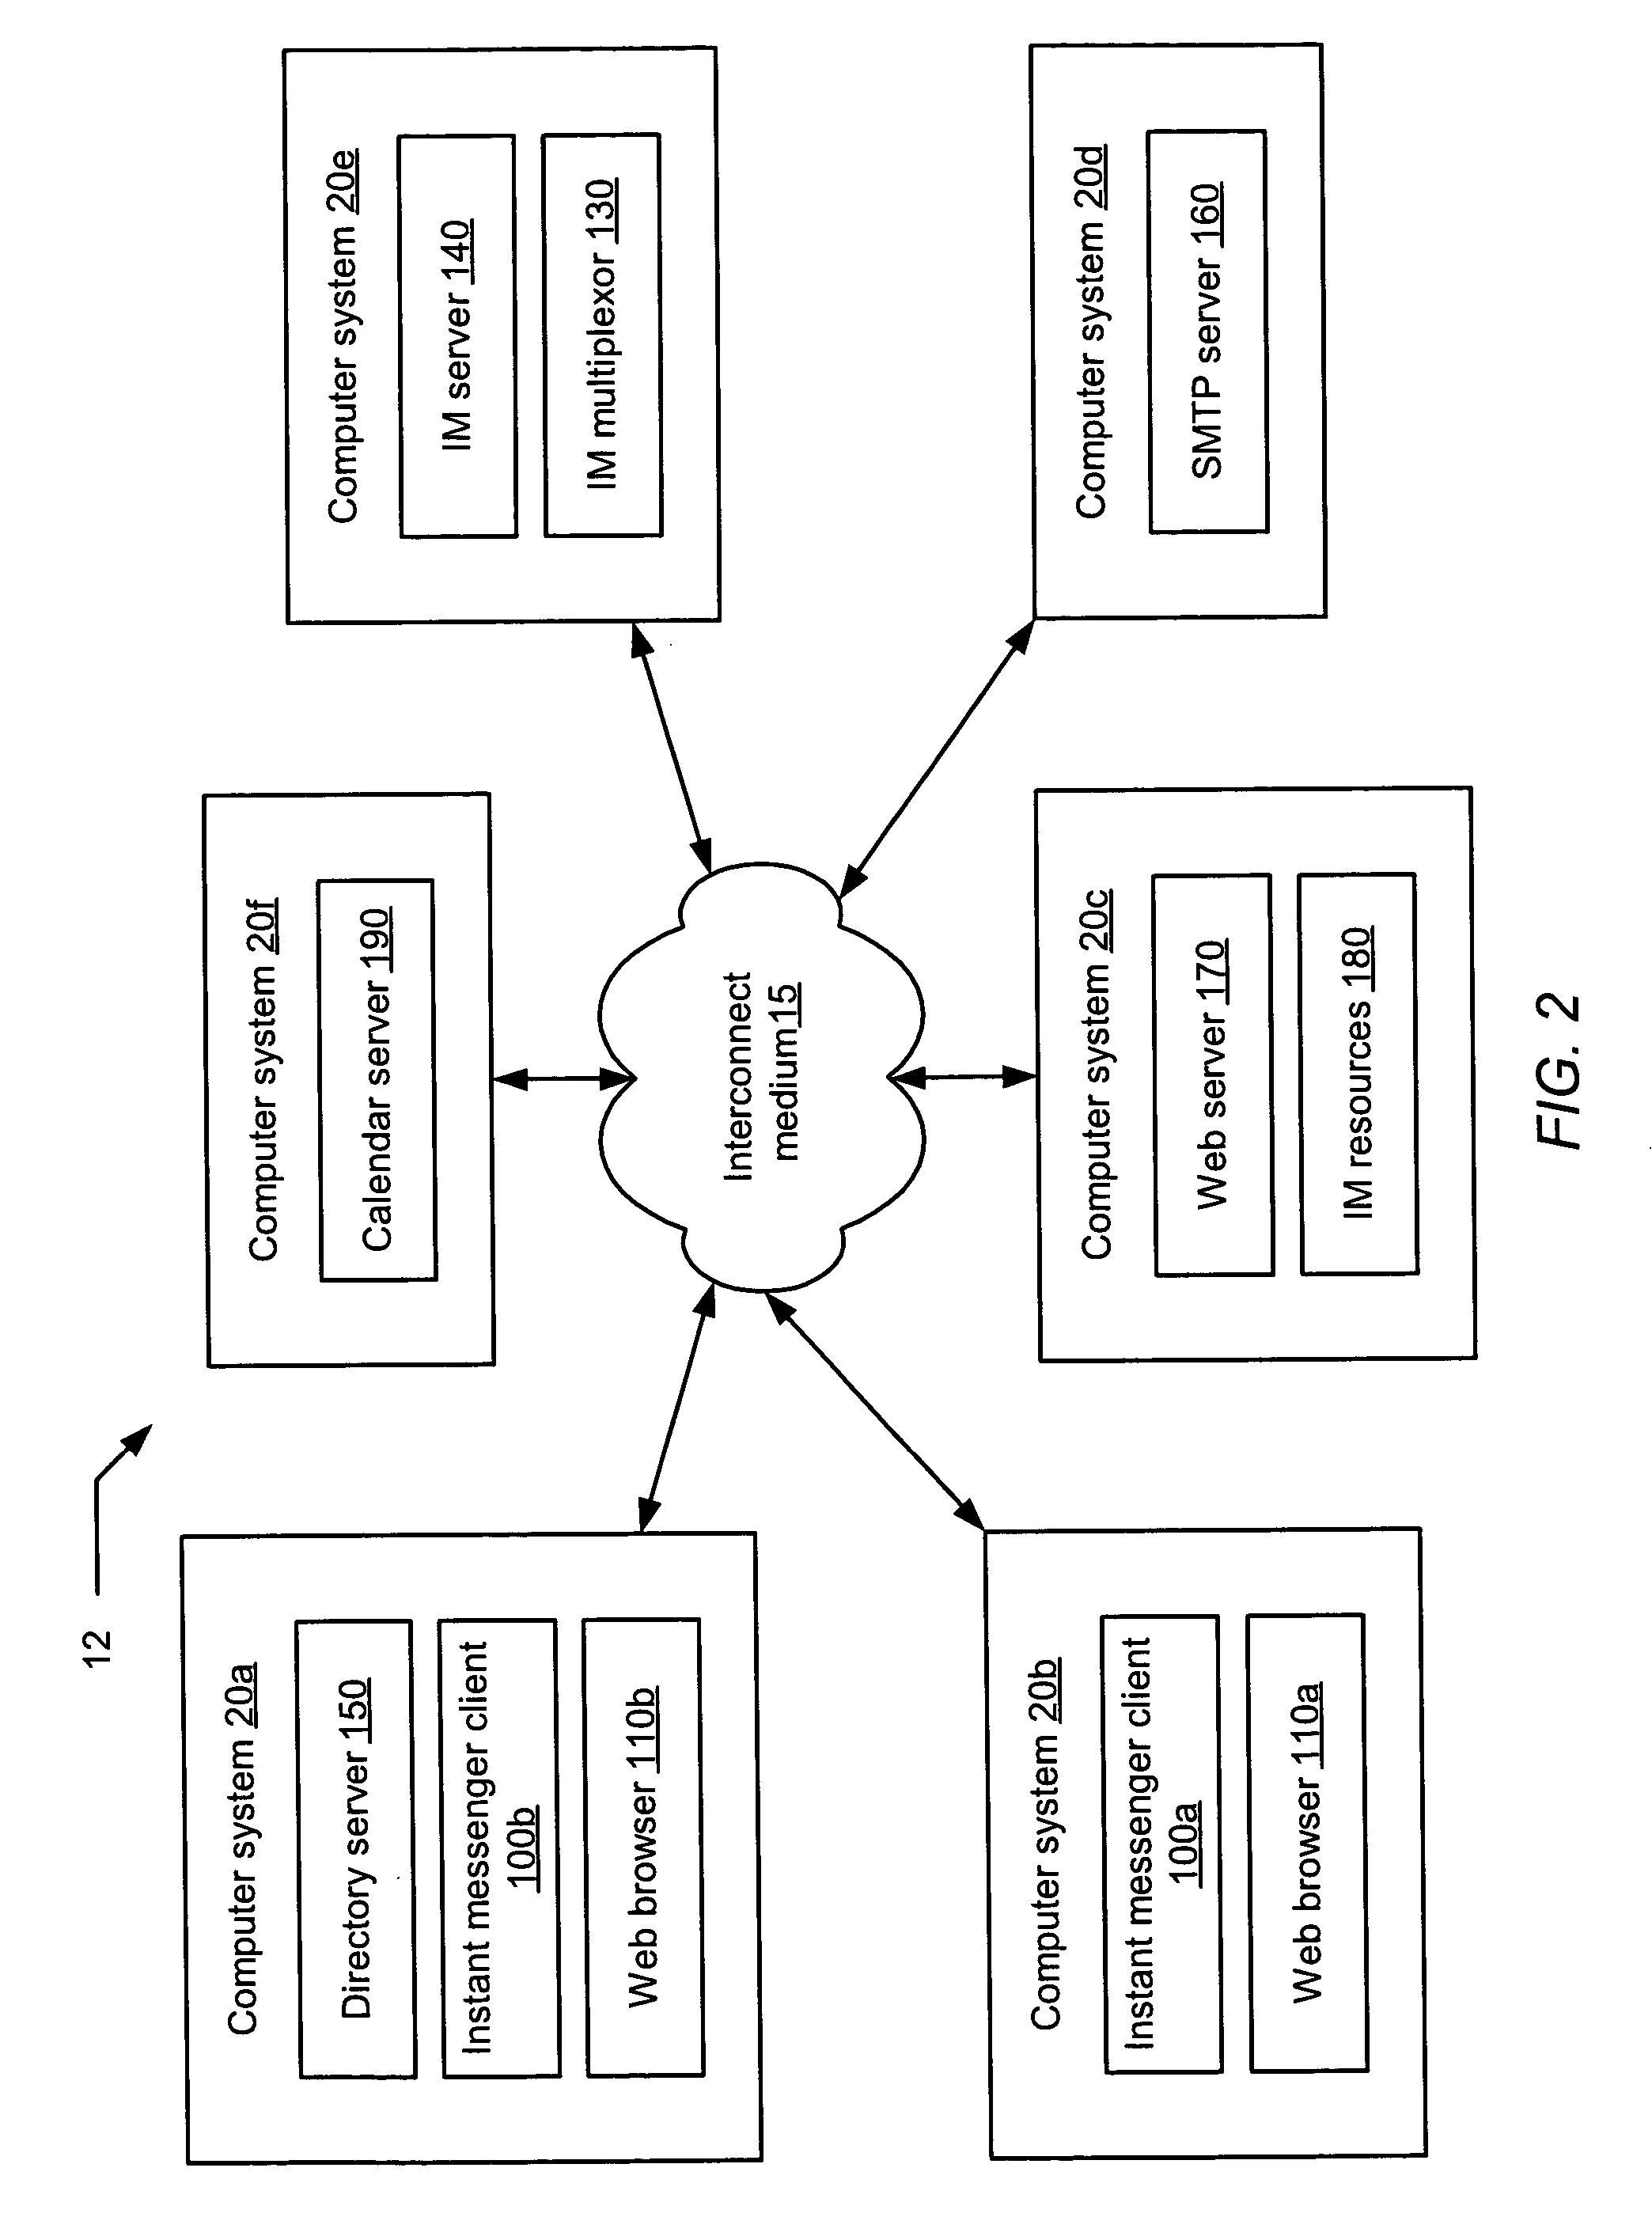 Method and system for processing instant messenger operations dependent upon presence state information in an instant messaging system